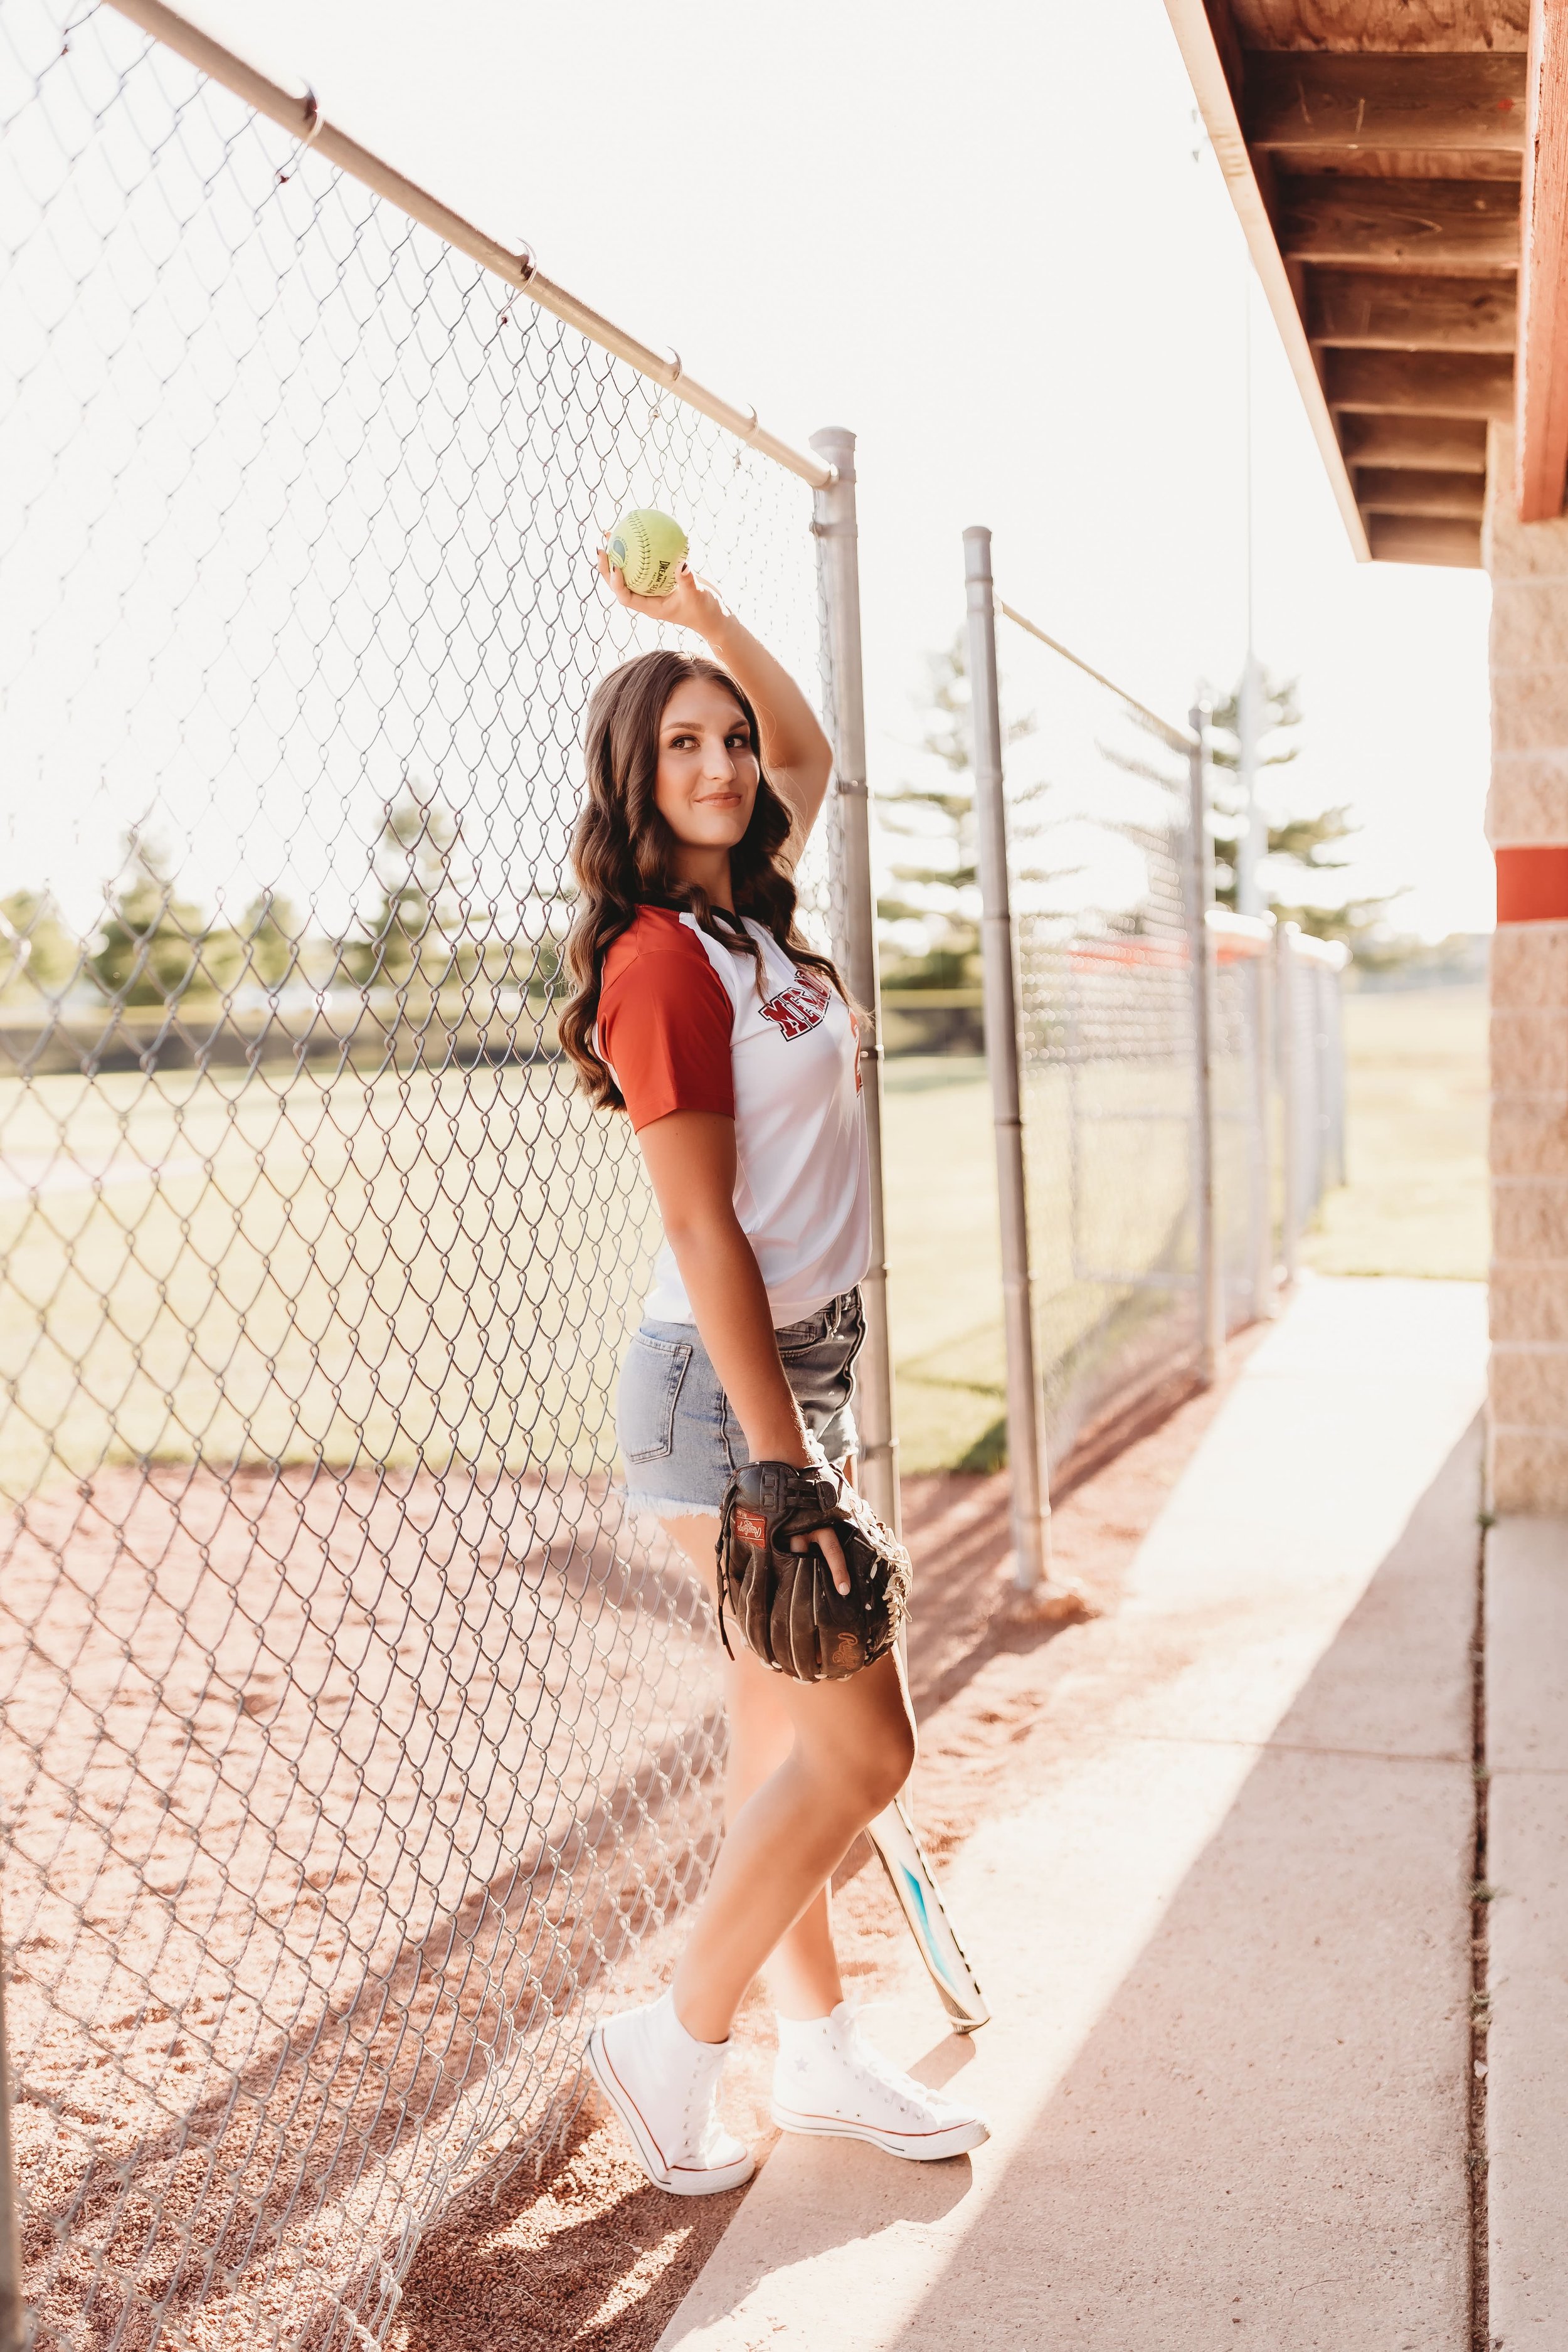  High school senior leans against the chain link fence of a dugout while holding a softball in one hand with a softball glove and smiles while testing softball senior picture ideas in metamora Illinois 